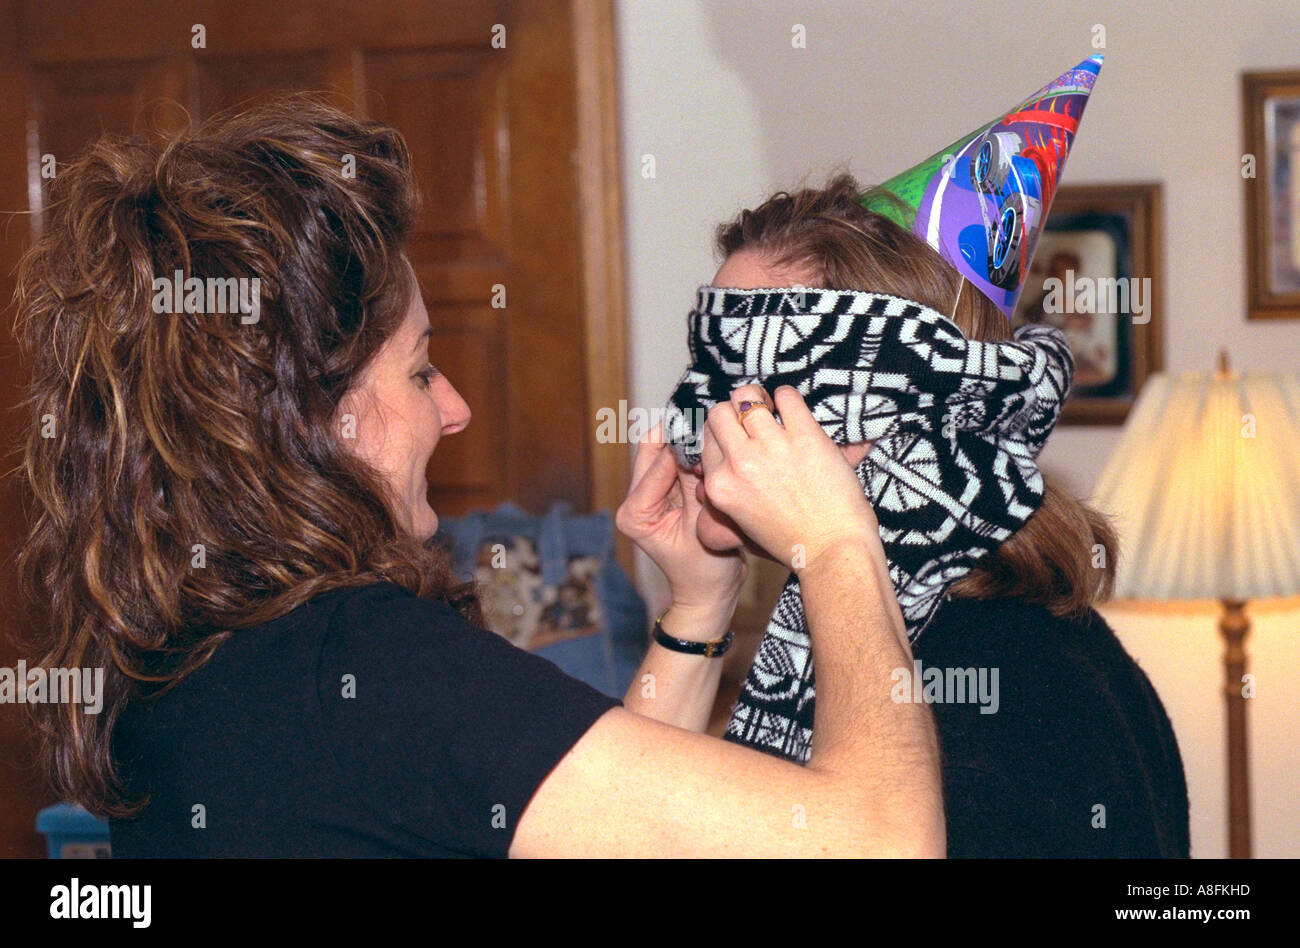 Mom checking mask for blindman's bluff birthday party game age 32. Brooklyn Park Minnesota USA Stock Photo